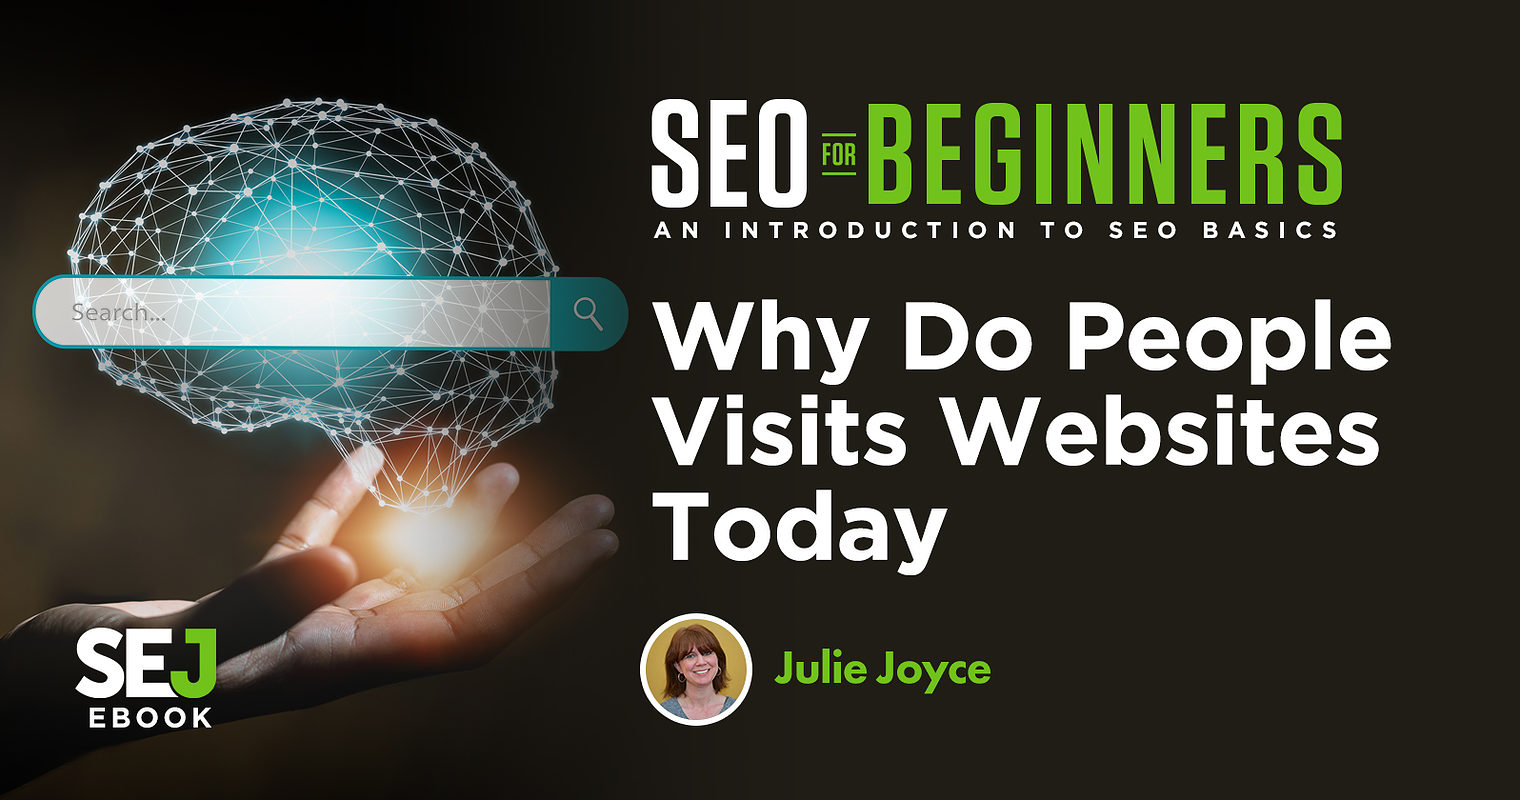 Why Do People Visit Websites Today?